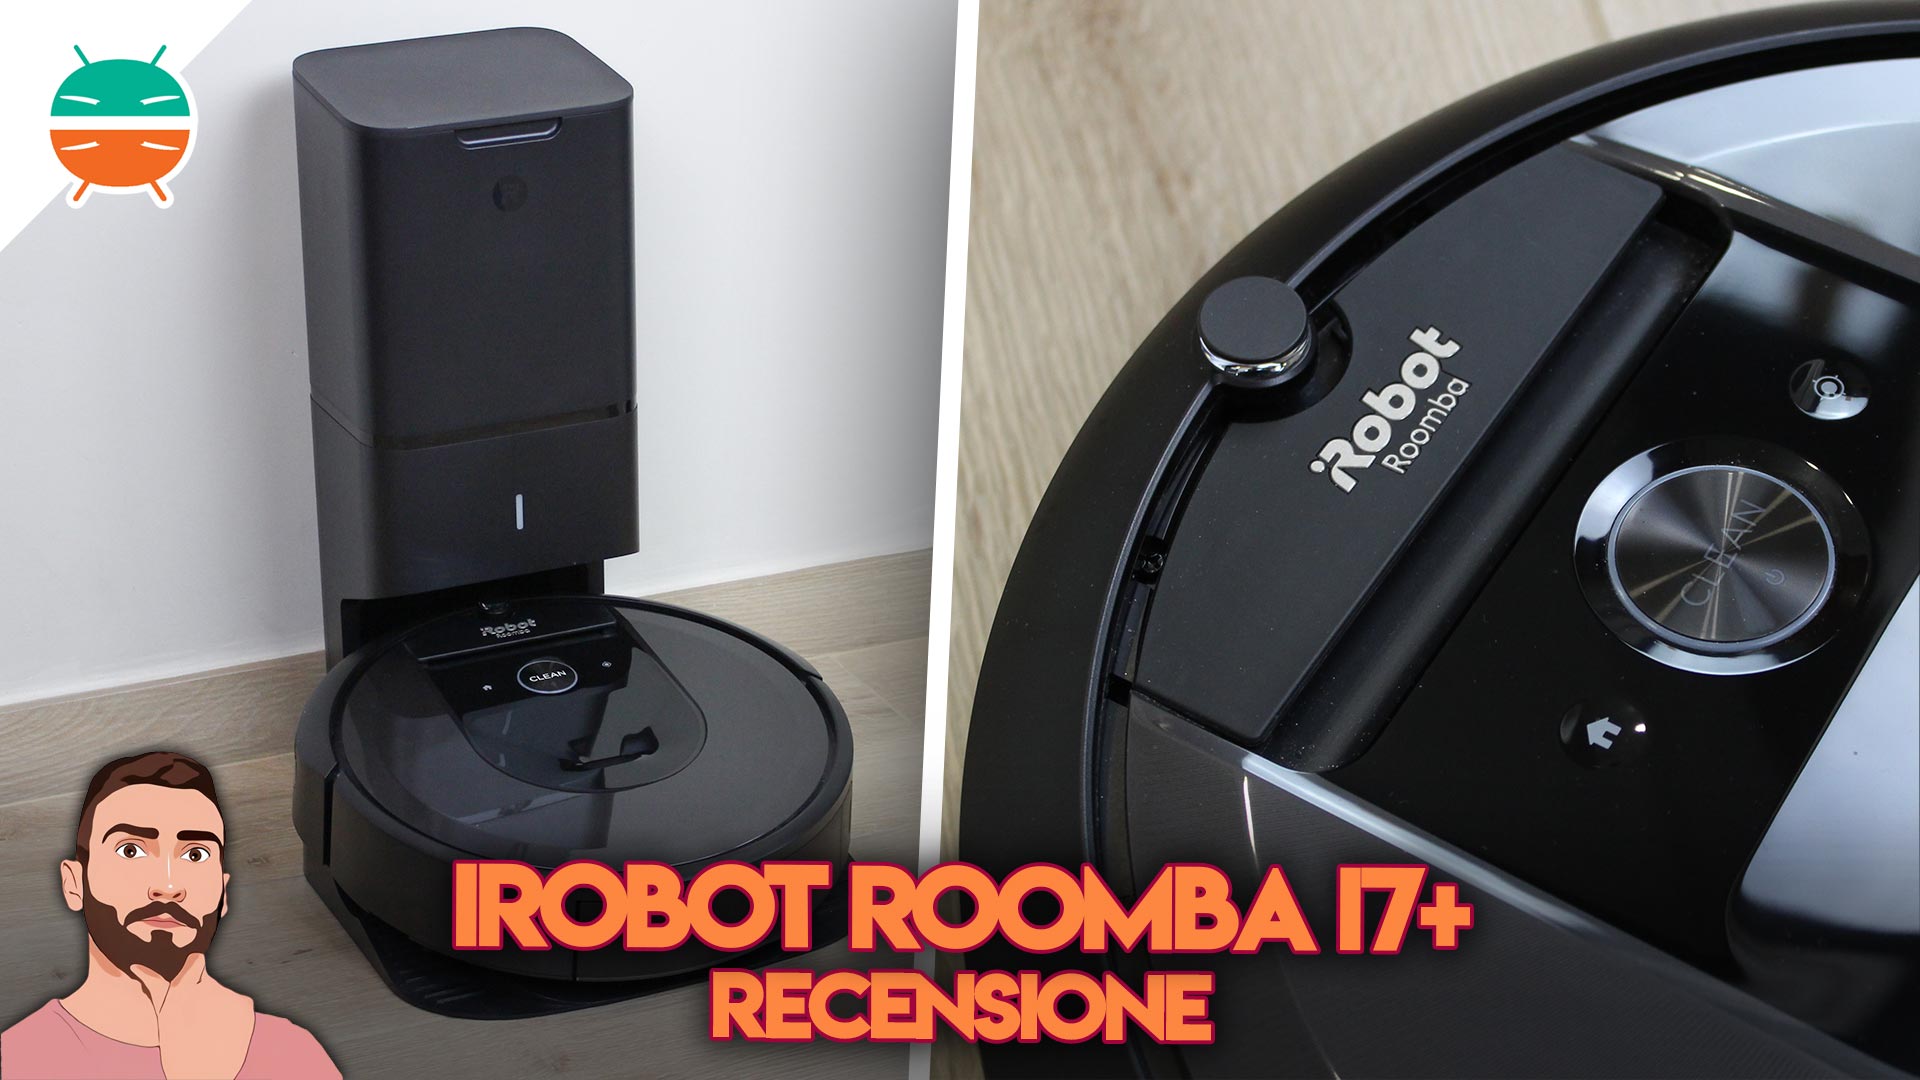 IRobot Roomba i7 + review: it's smart and cleans itself! - GizChina.it